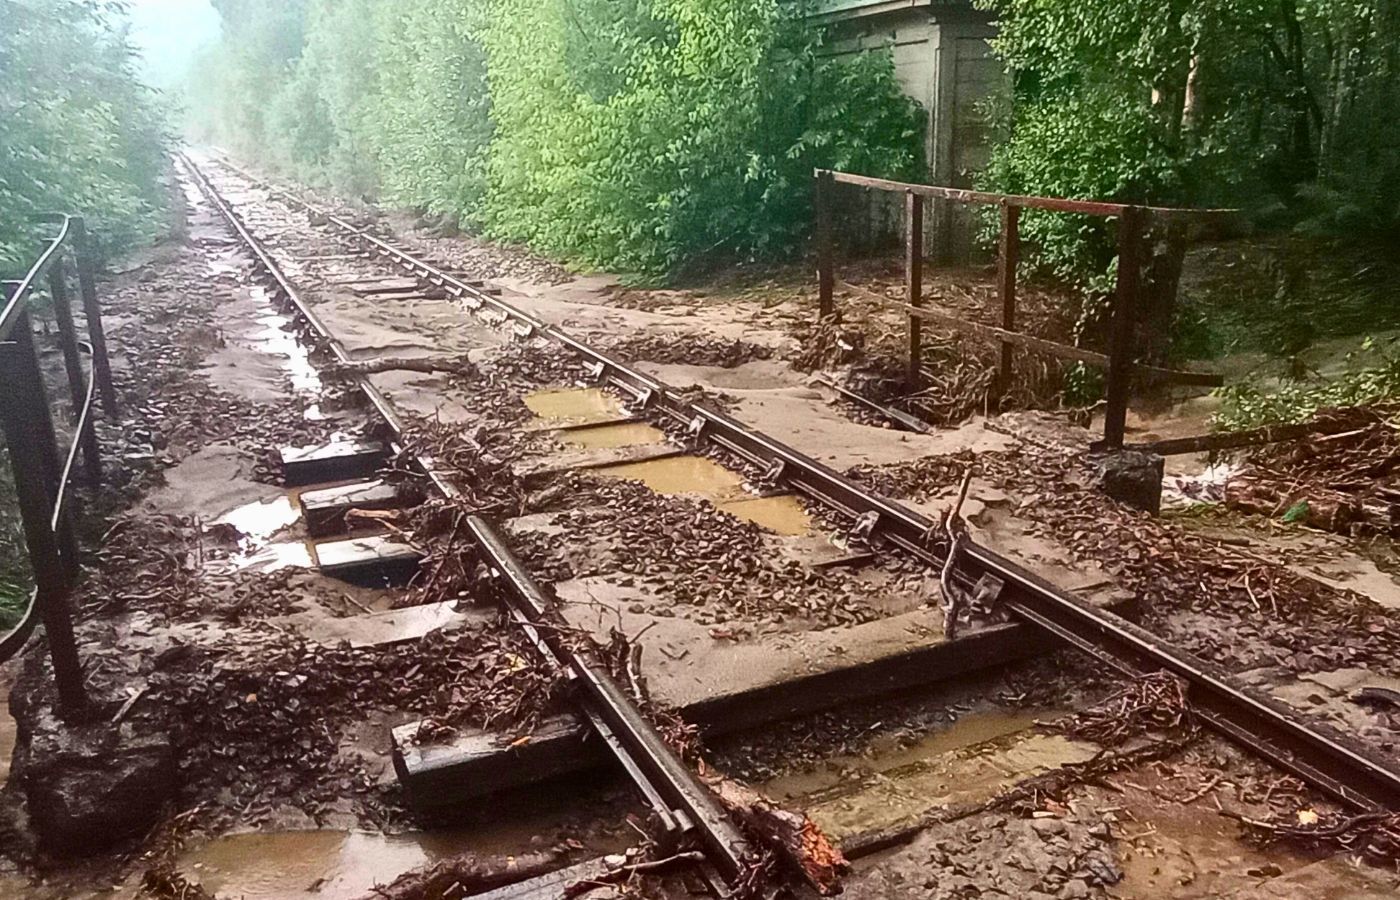 Network Rail identified three sites of damage which engineers are now working around the clock to fix.